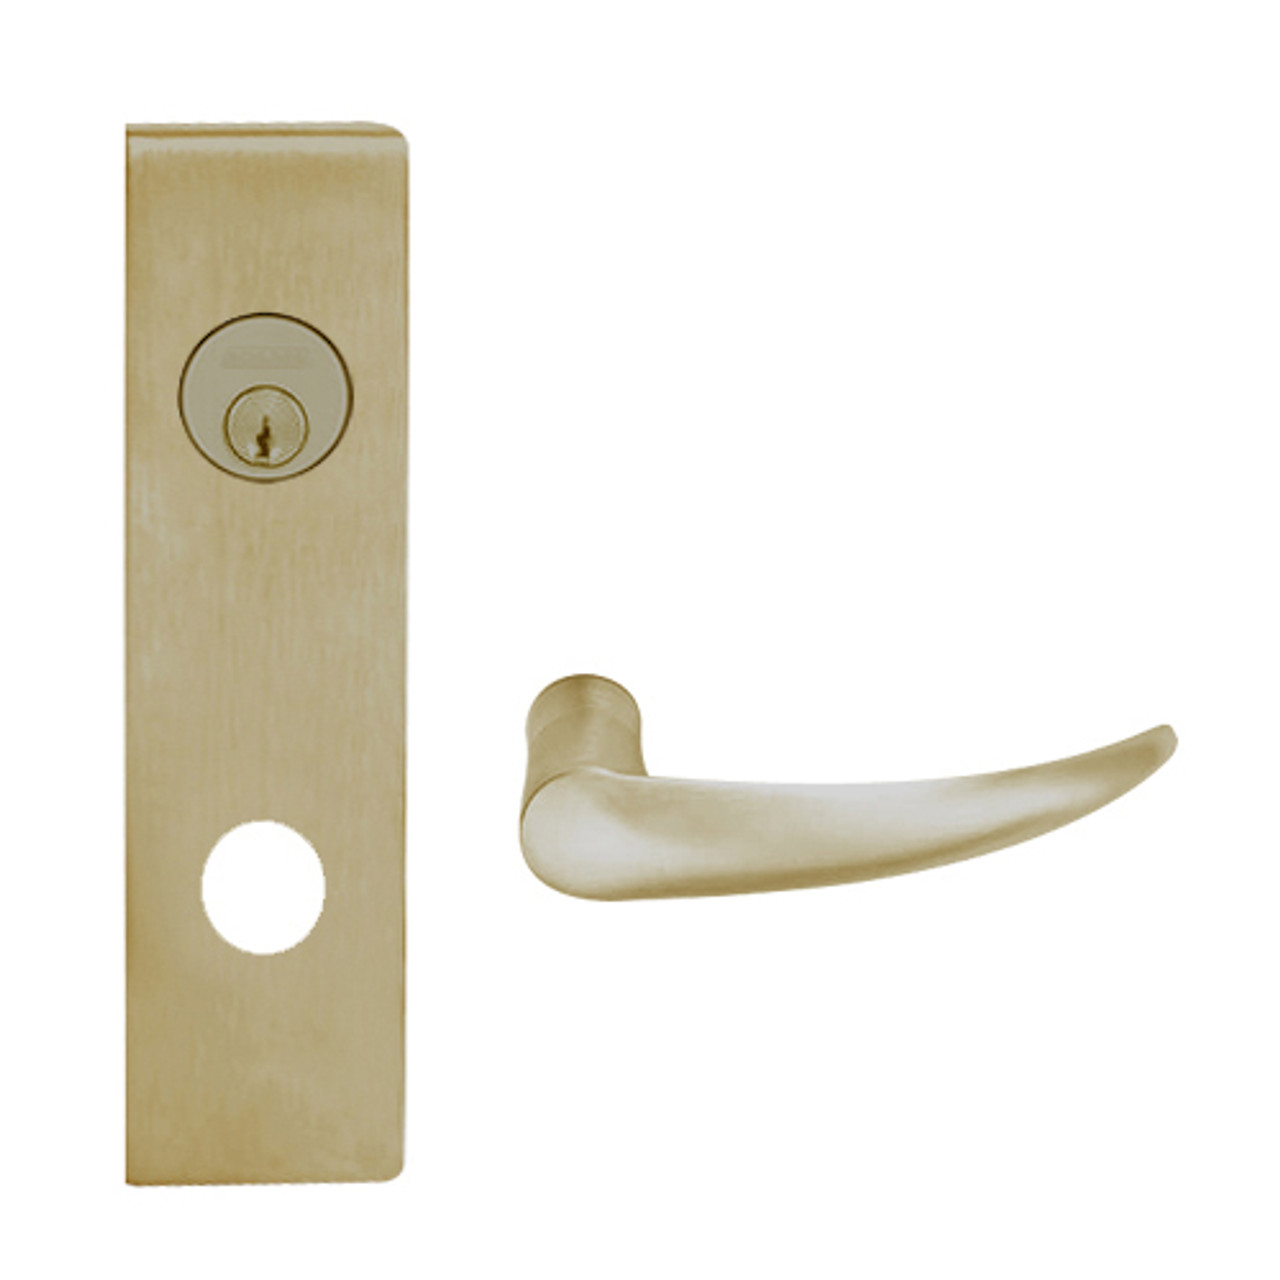 L9453L-OME-N-613 Schlage L Series Less Cylinder Entrance with Deadbolt Commercial Mortise Lock with Omega Lever Design in Oil Rubbed Bronze